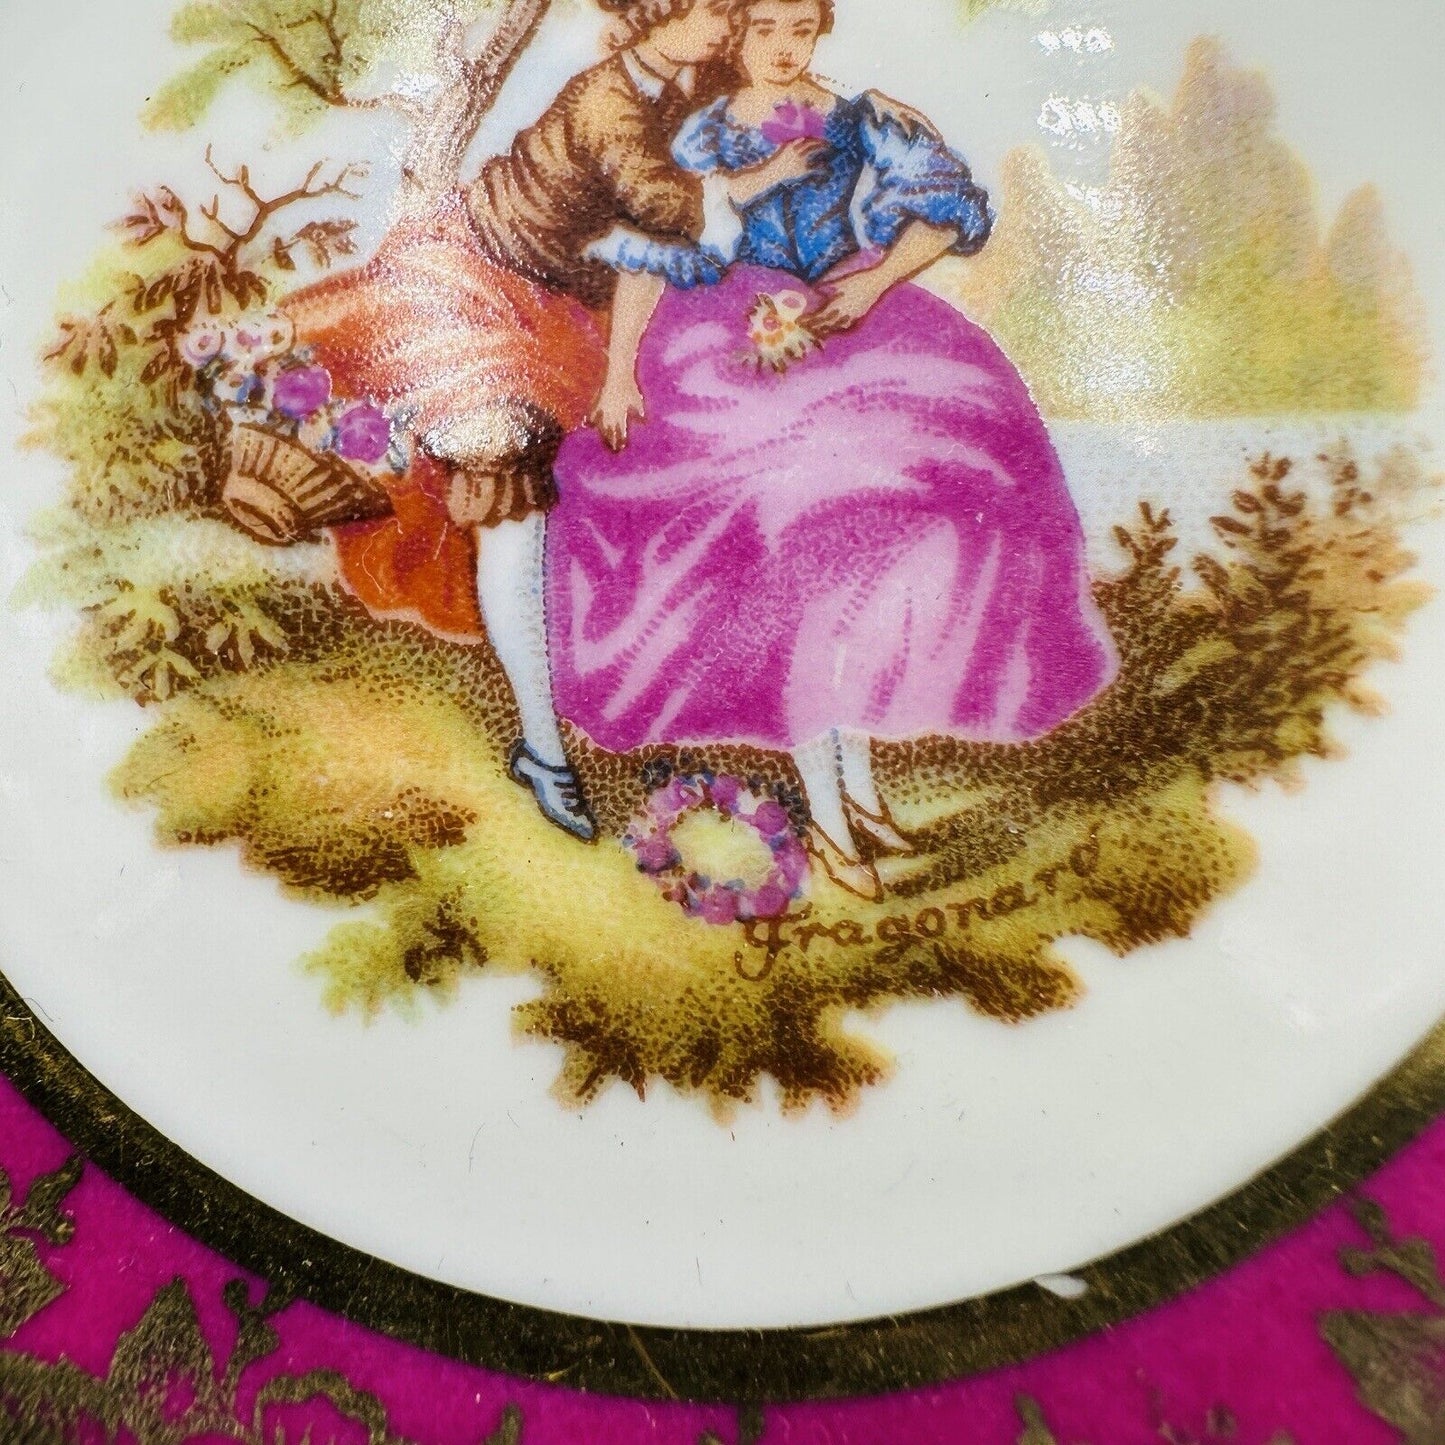 Limoges Porcelain France Traditional Courting Couple &Cherubs miniature plates